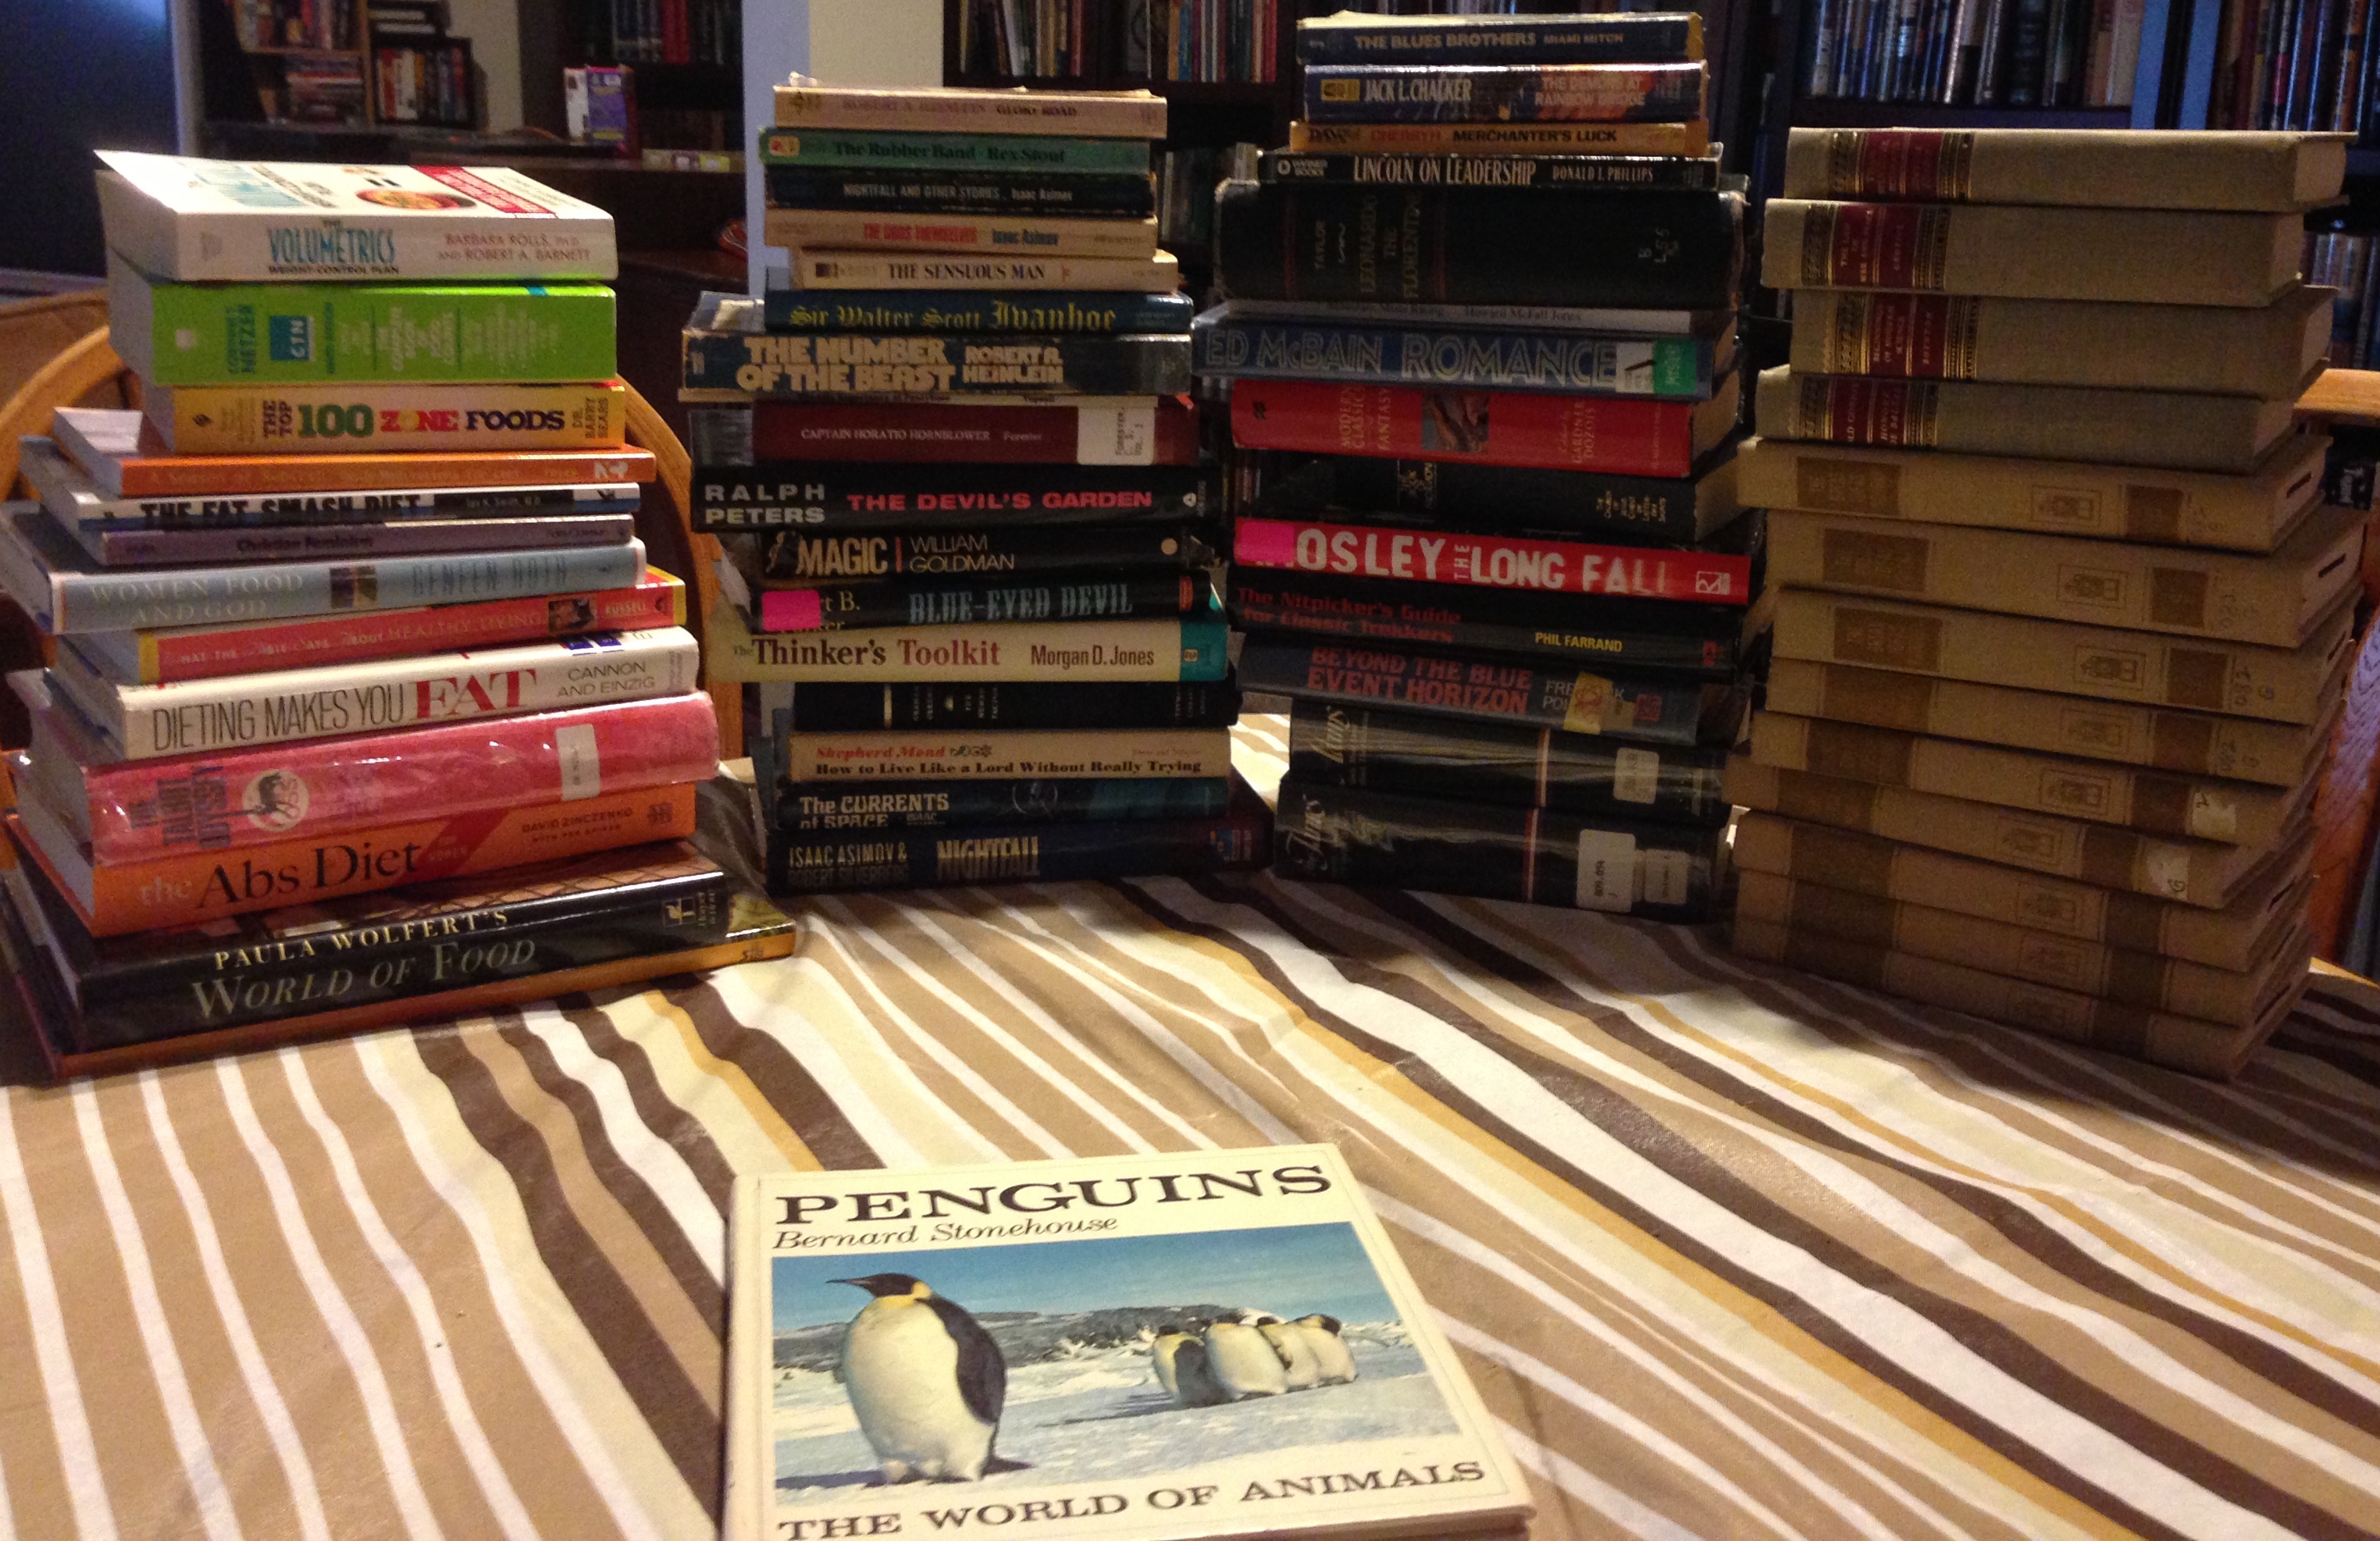 Spring 2014 Friends of the Christian County Library book sale haul